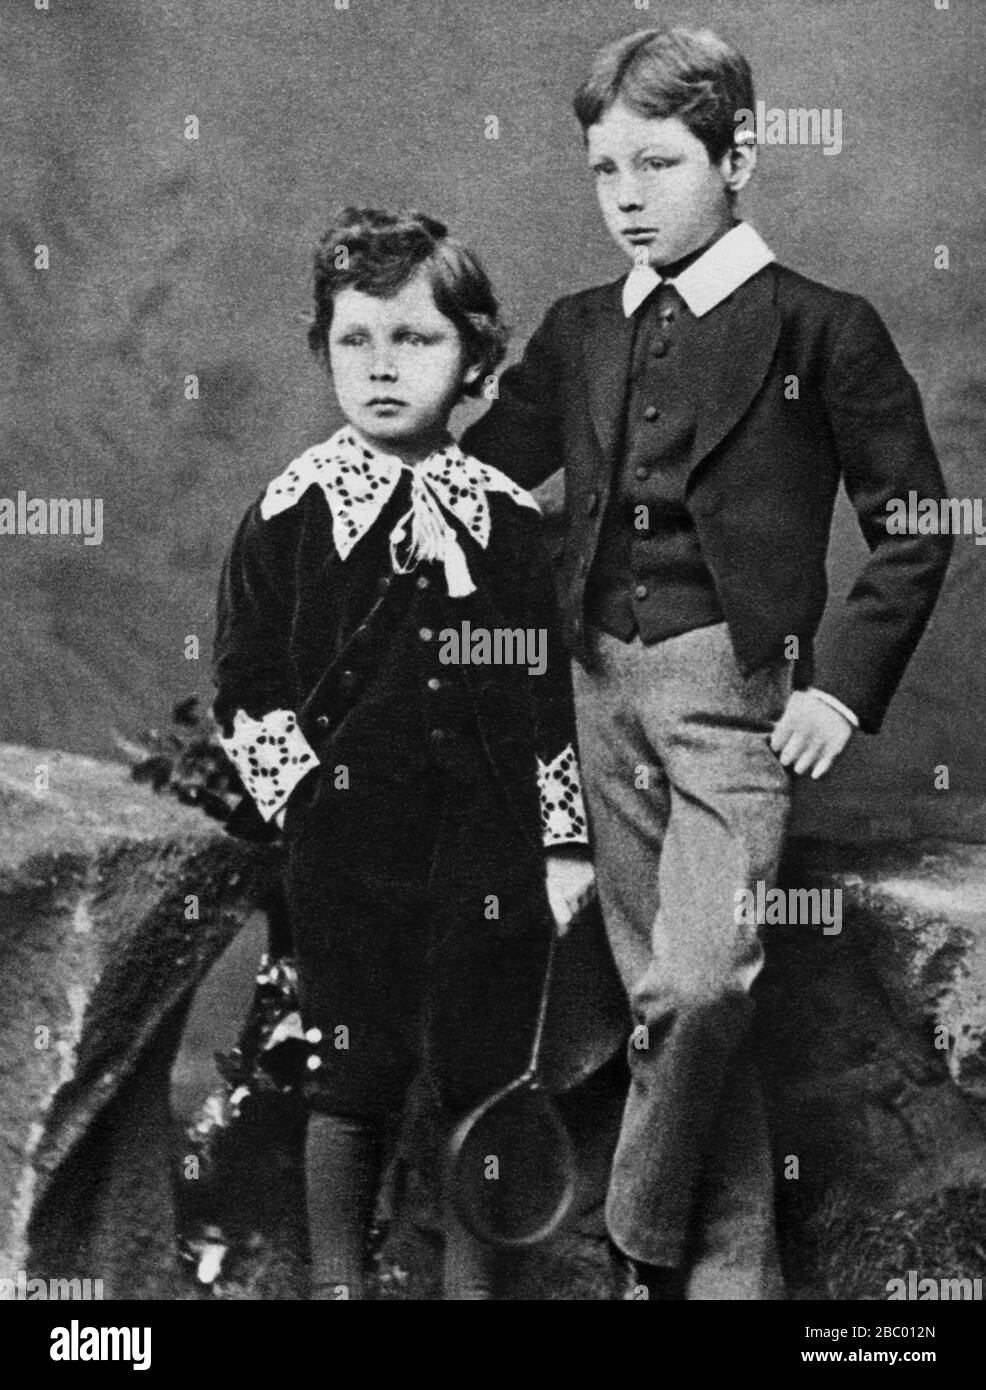 Winston Churchill age 10 with his brother, Jack Strange Churchill. 1884. Stock Photo